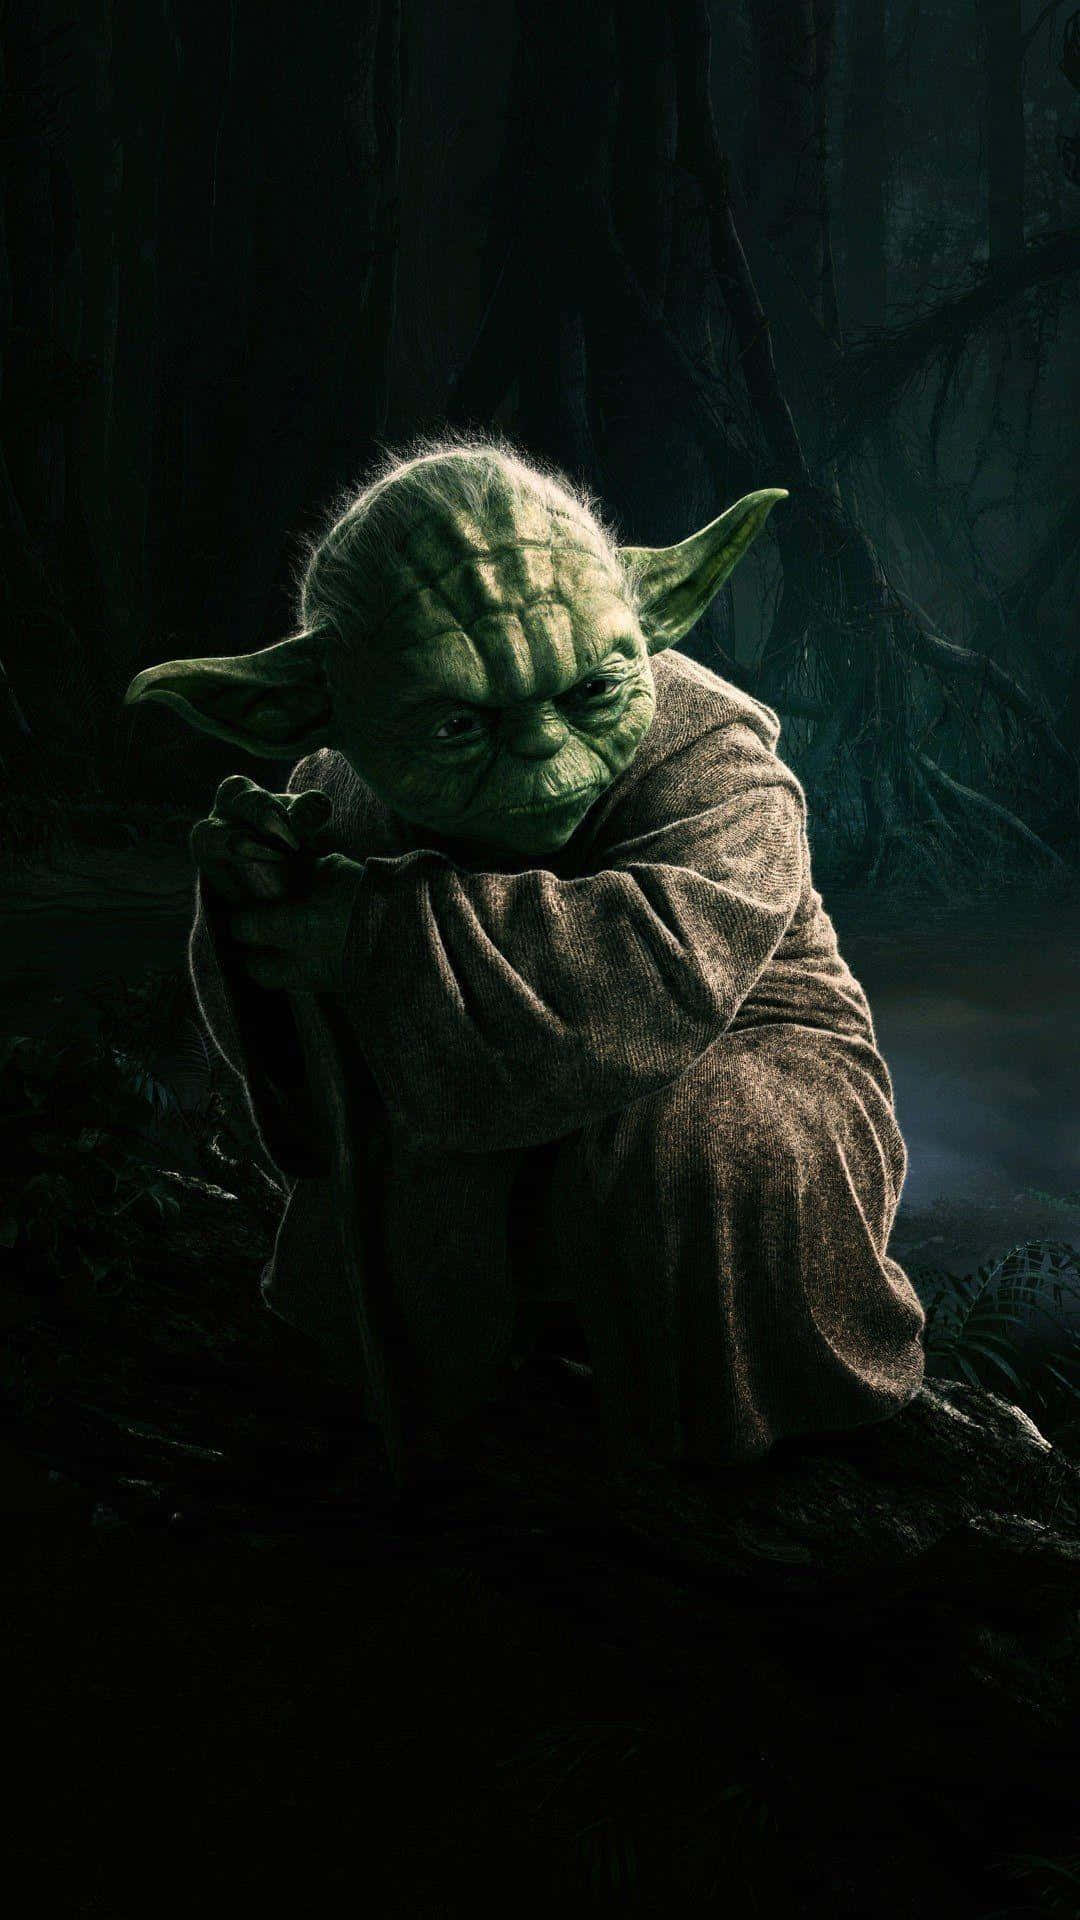 “Do, or do not. There is no try” - Yoda